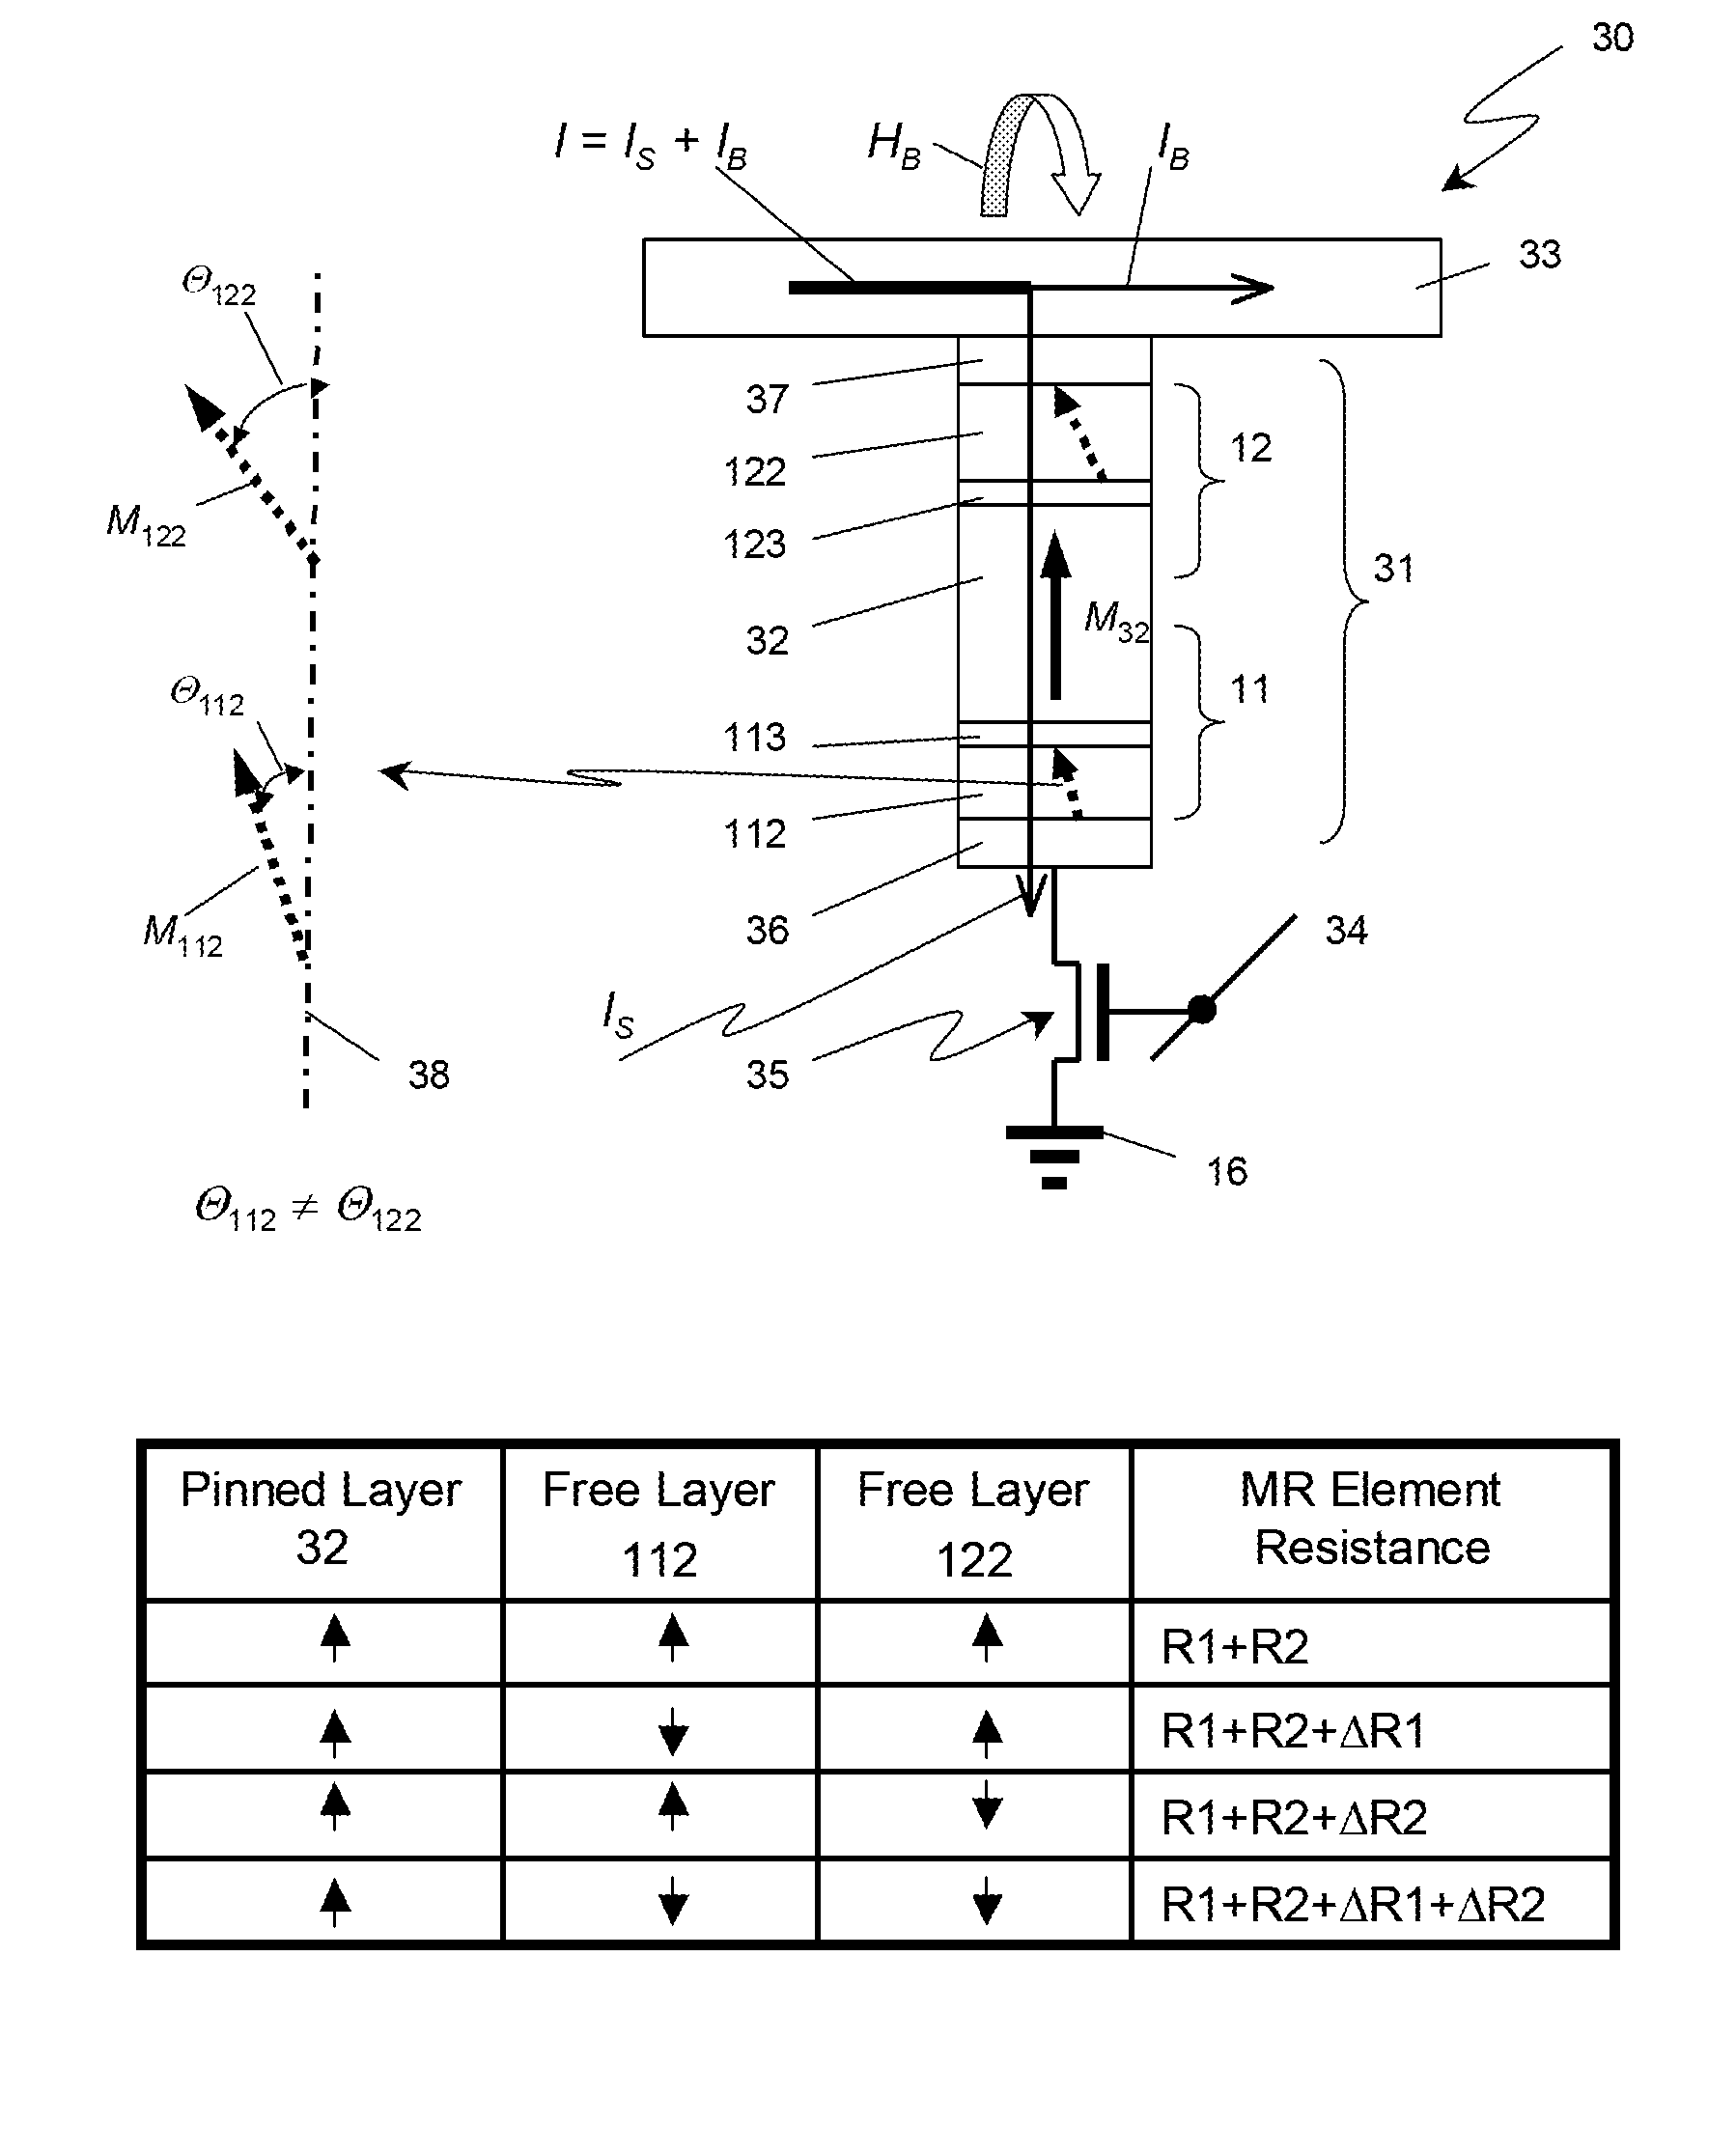 Multibit cell of magnetic random access memory with perpendicular magnetization